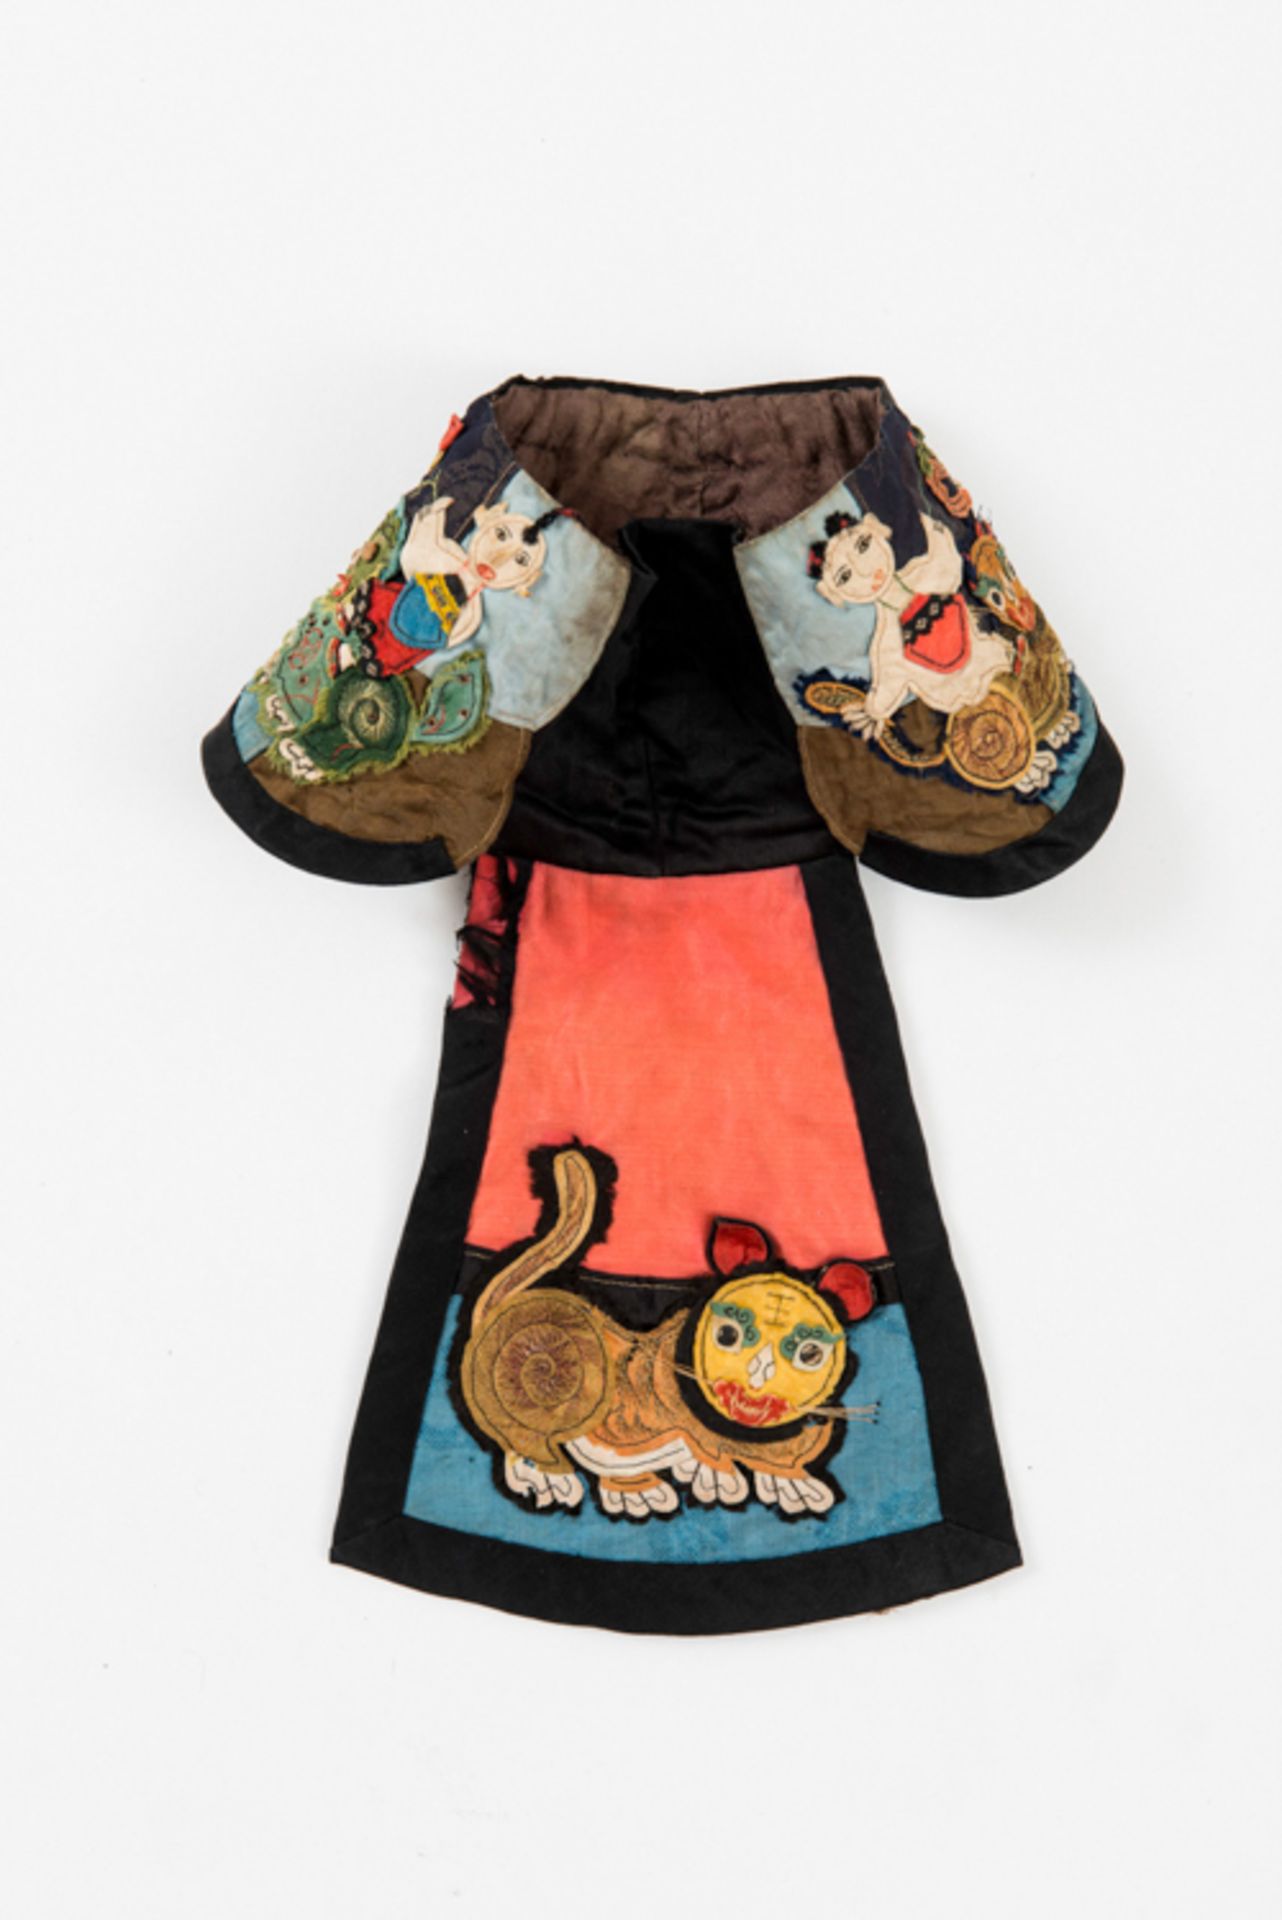 CHILDREN’S COLLAR  Silk. China, Qing, 19th – early 20th century  Decorated with appliqué with